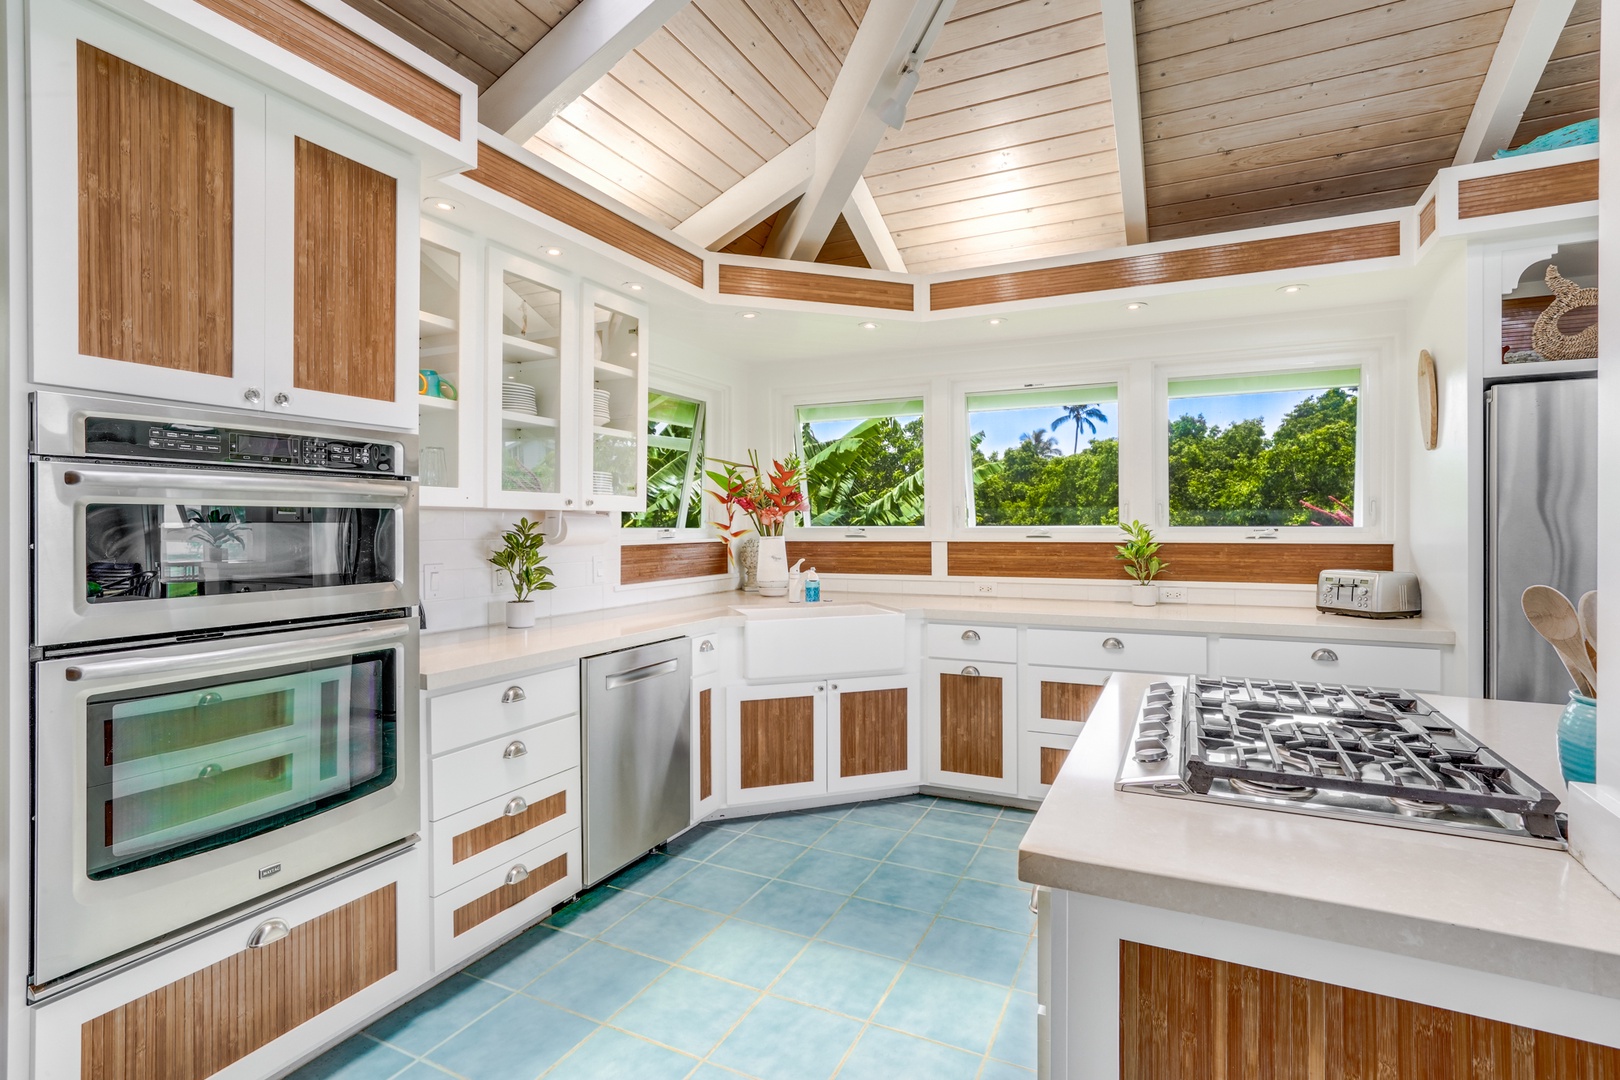 Princeville Vacation Rentals, Wai Lani - Kitchen area with top-tiered appliances, wide counter space and panoramic vistas as you prep delightful meals.